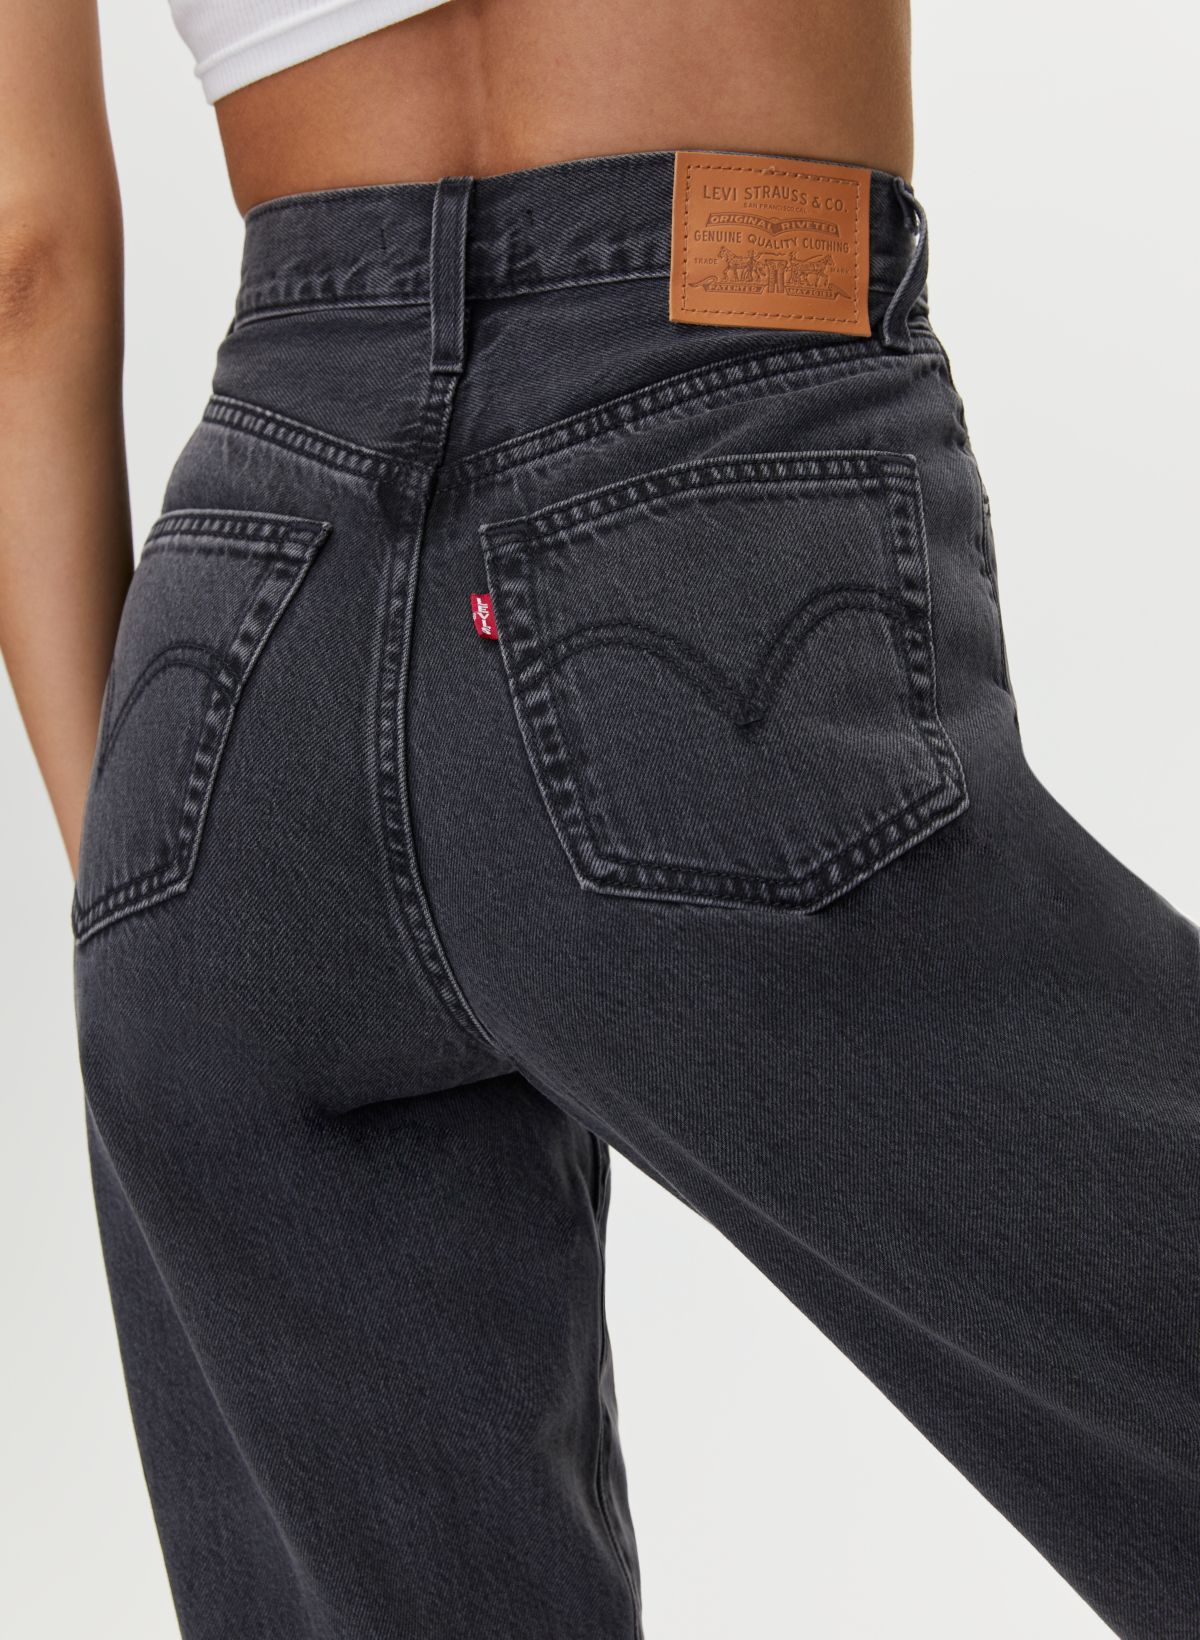 Levis High Waisted Taper Mom Jeans Now You Know – Dales Clothing